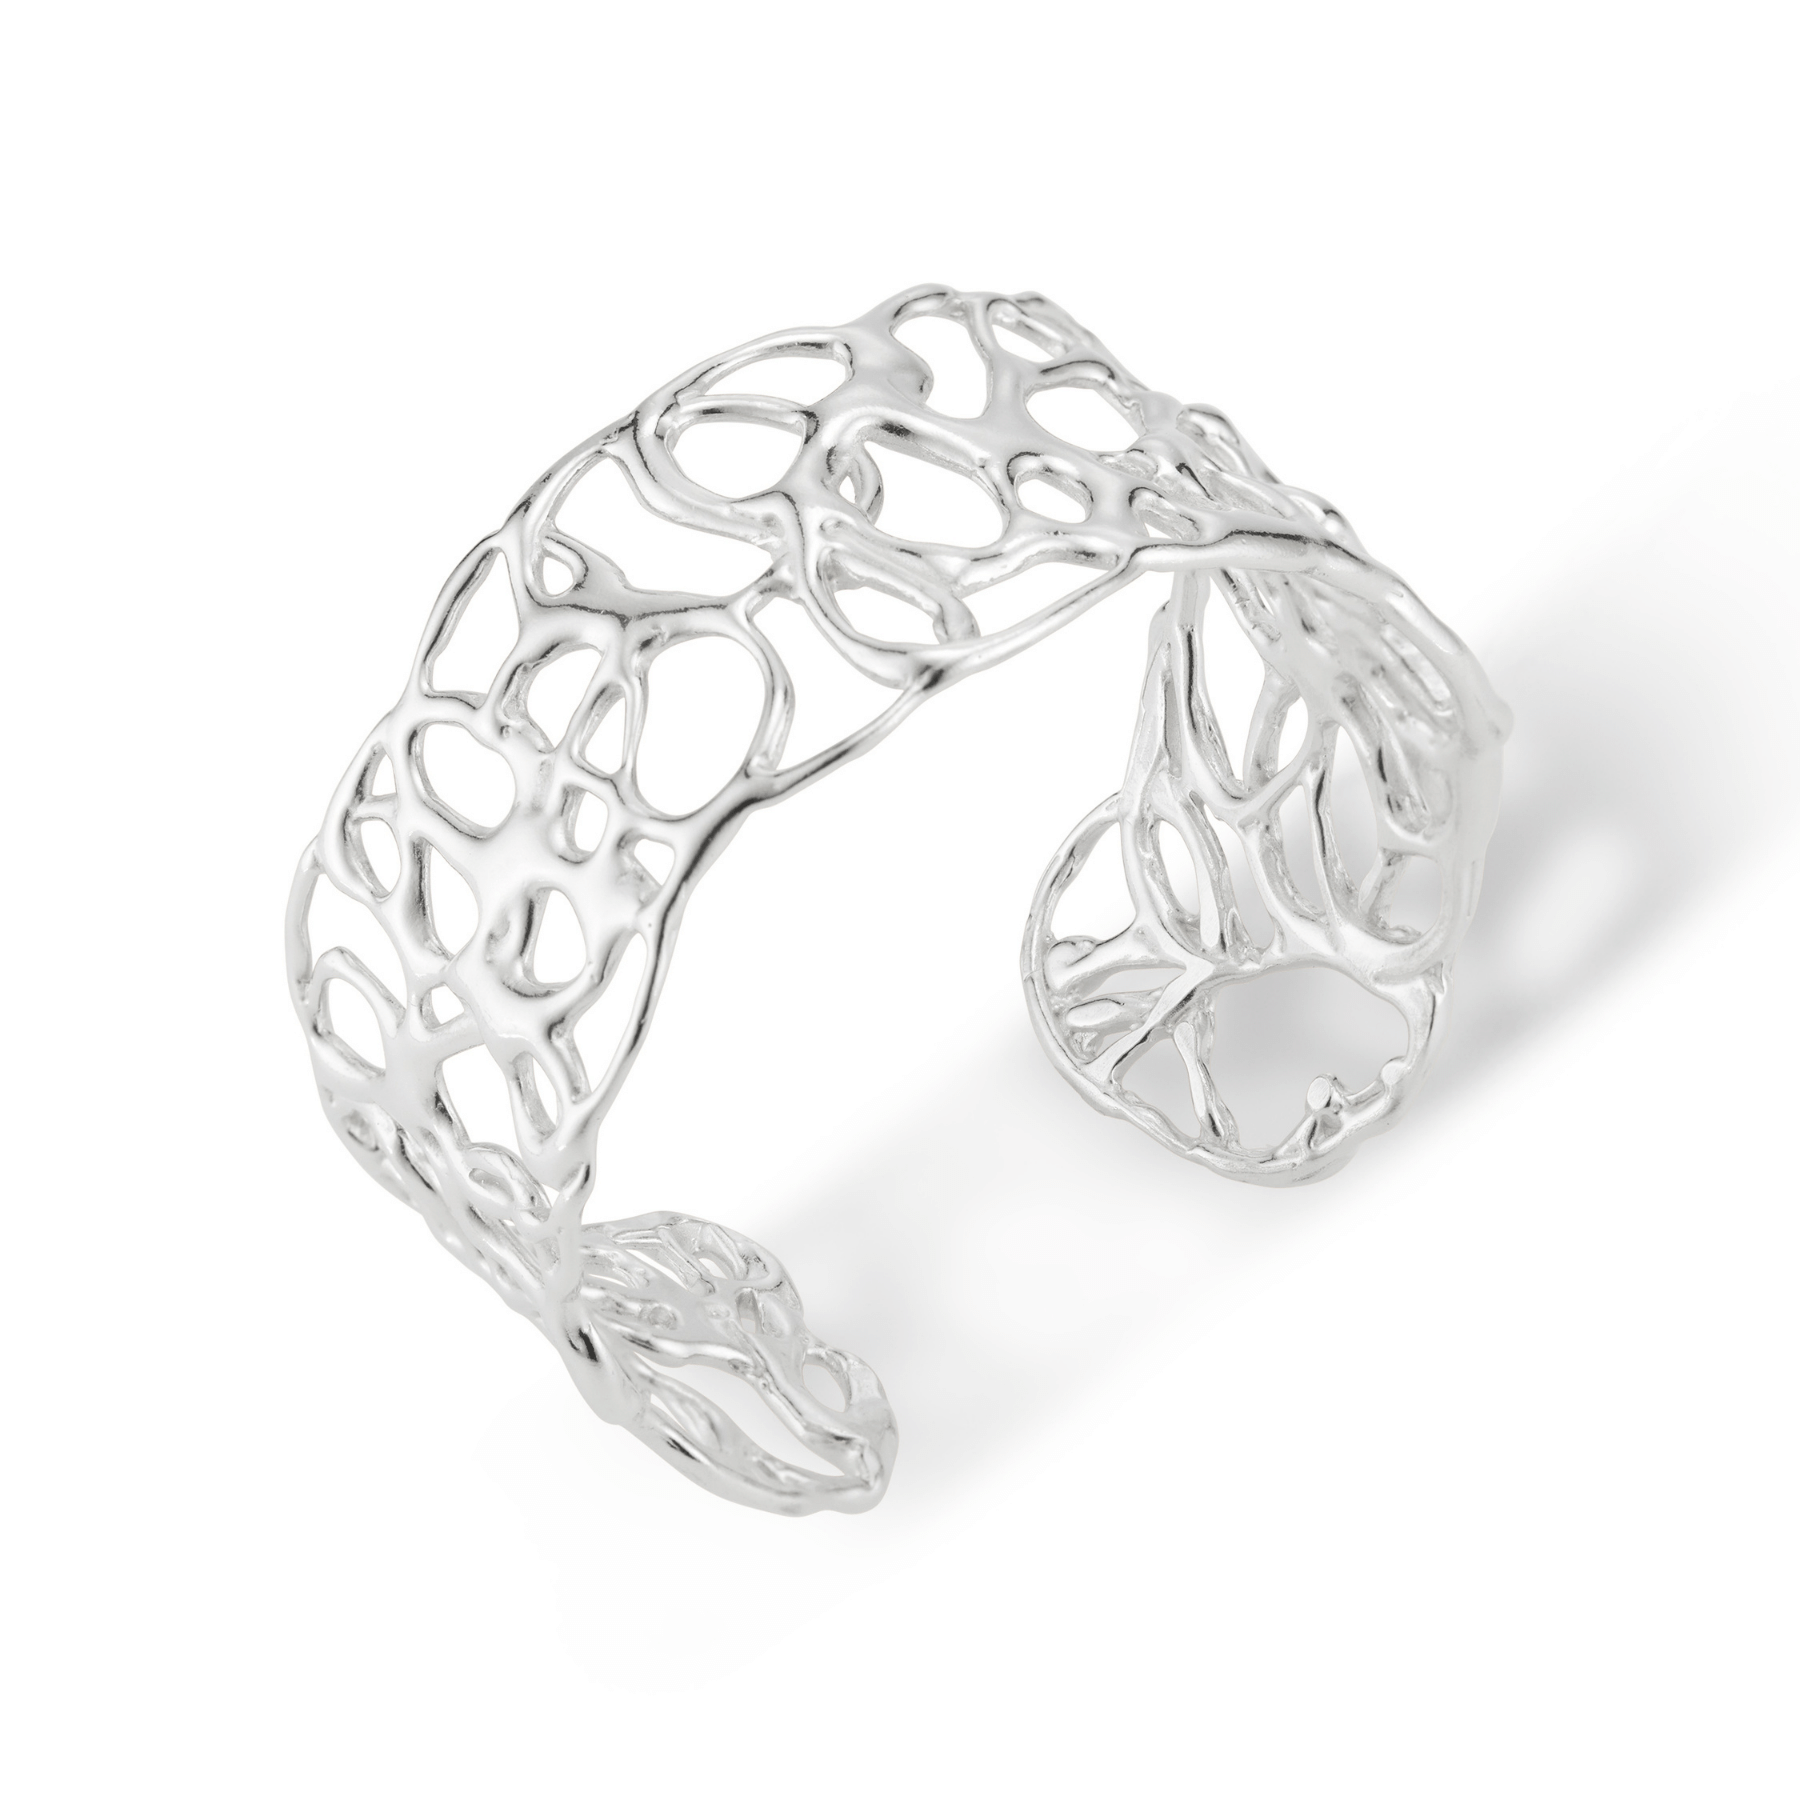 Abstract squiggle wide cuff bracelet in sterling silver.